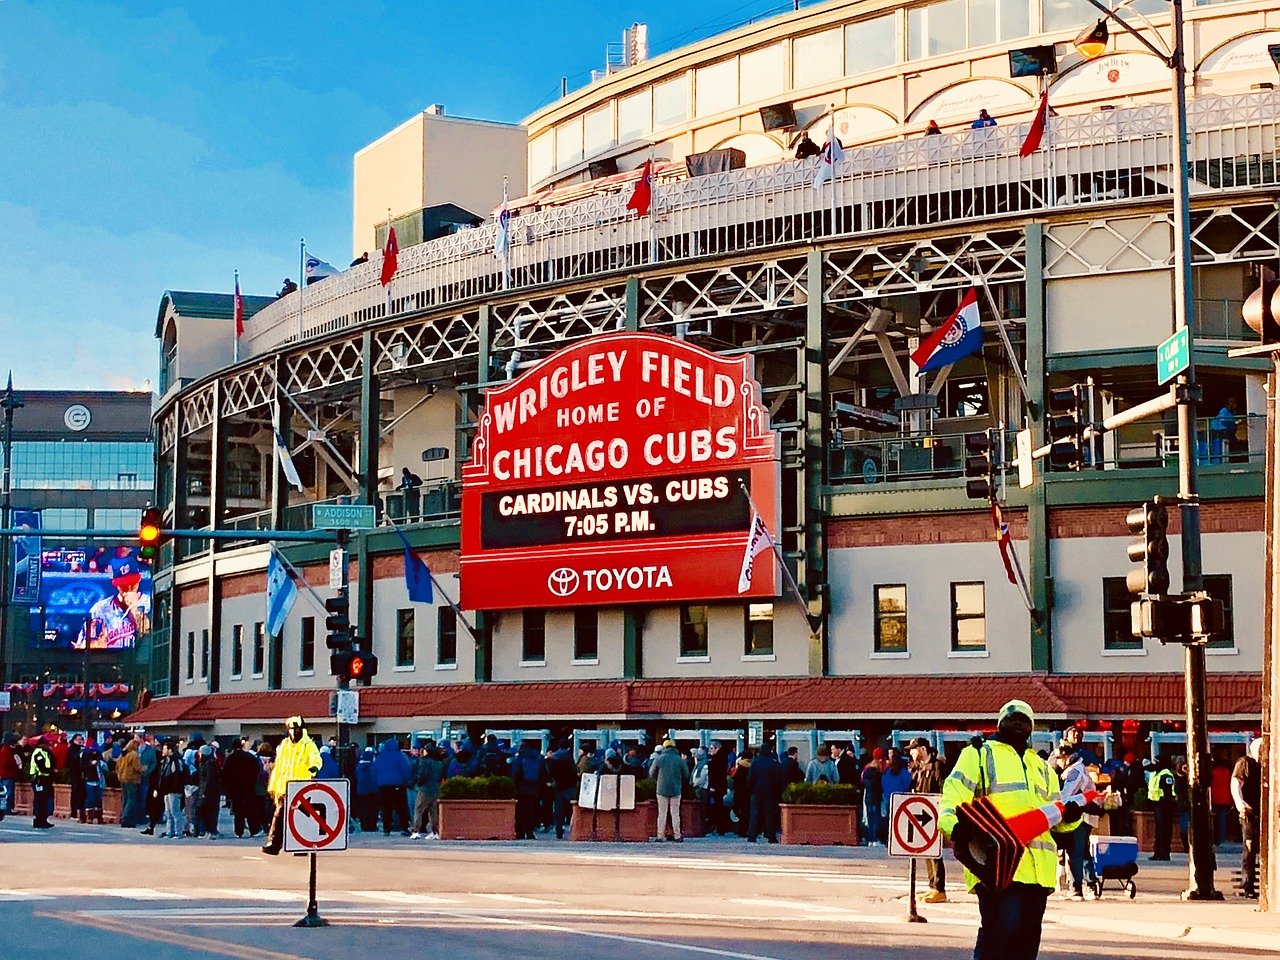 How To Buy Wrigley Field Rooftop Seats For Cubs Games In 2020